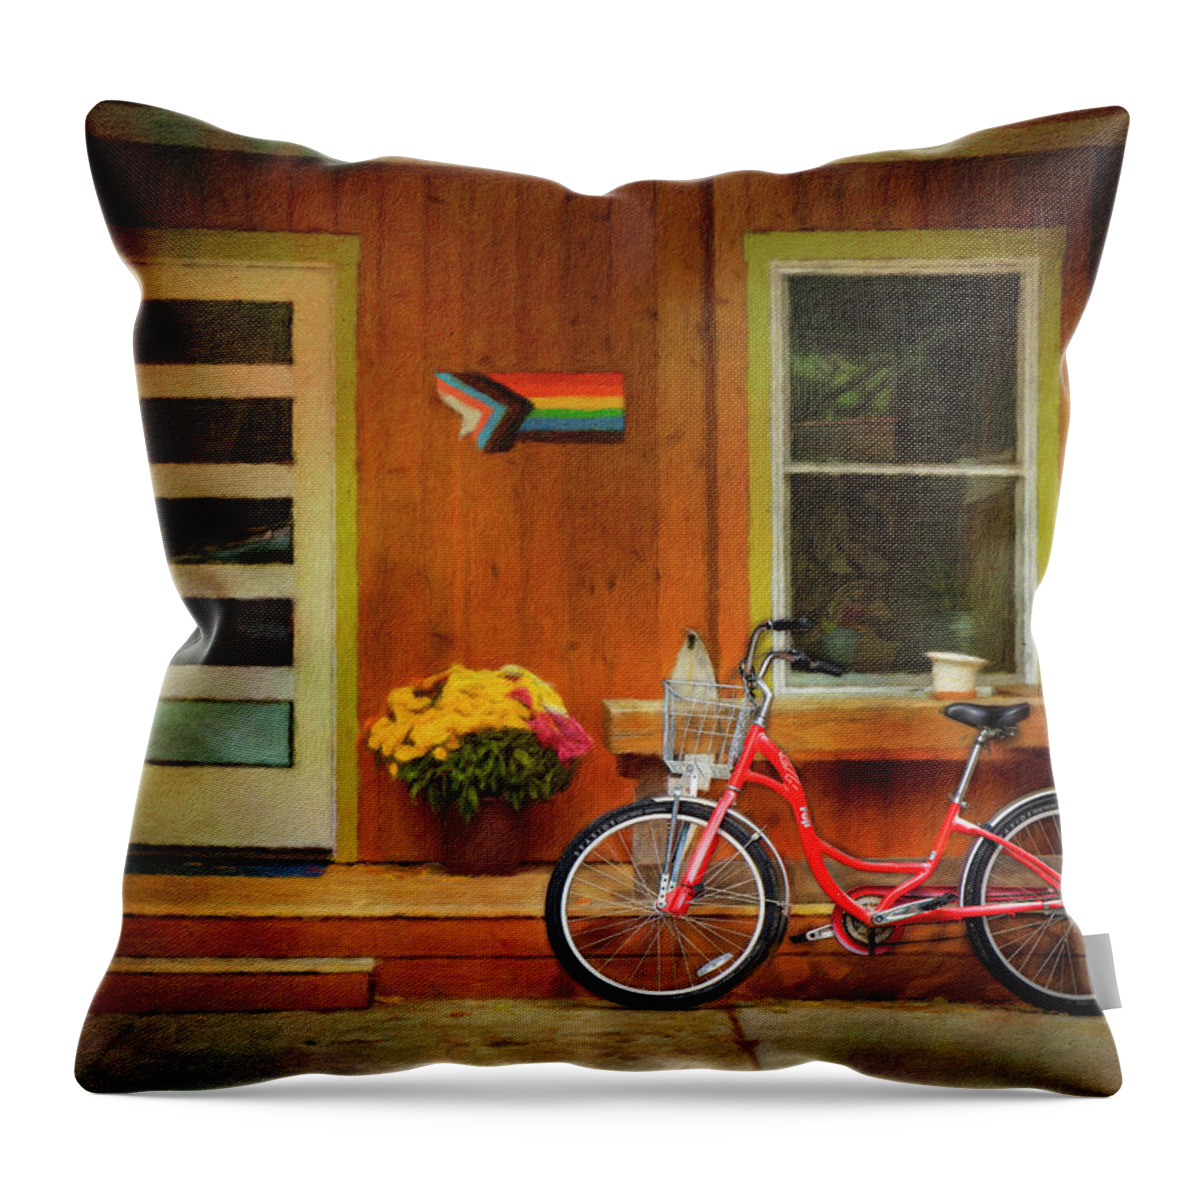 Aib_2022 #2551 Throw Pillow featuring the photograph The Scarlet Bicycle by Craig J Satterlee